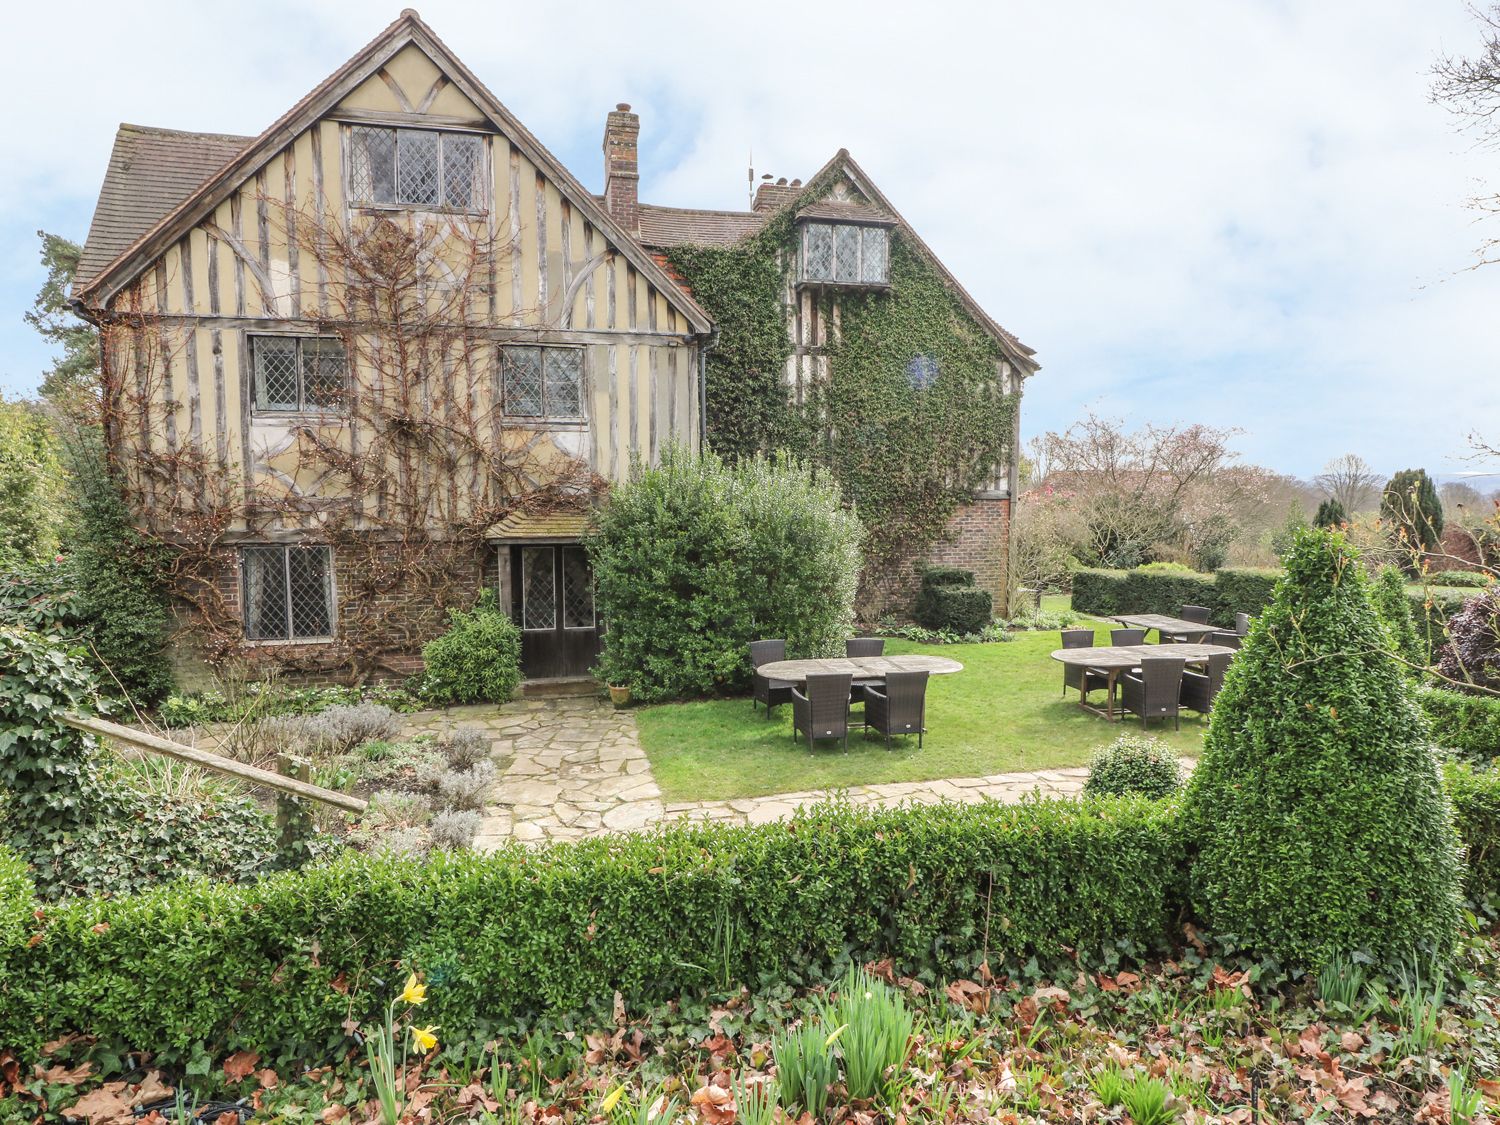 Hoath House in Chiddingstone in Kent top group accommodation cottages